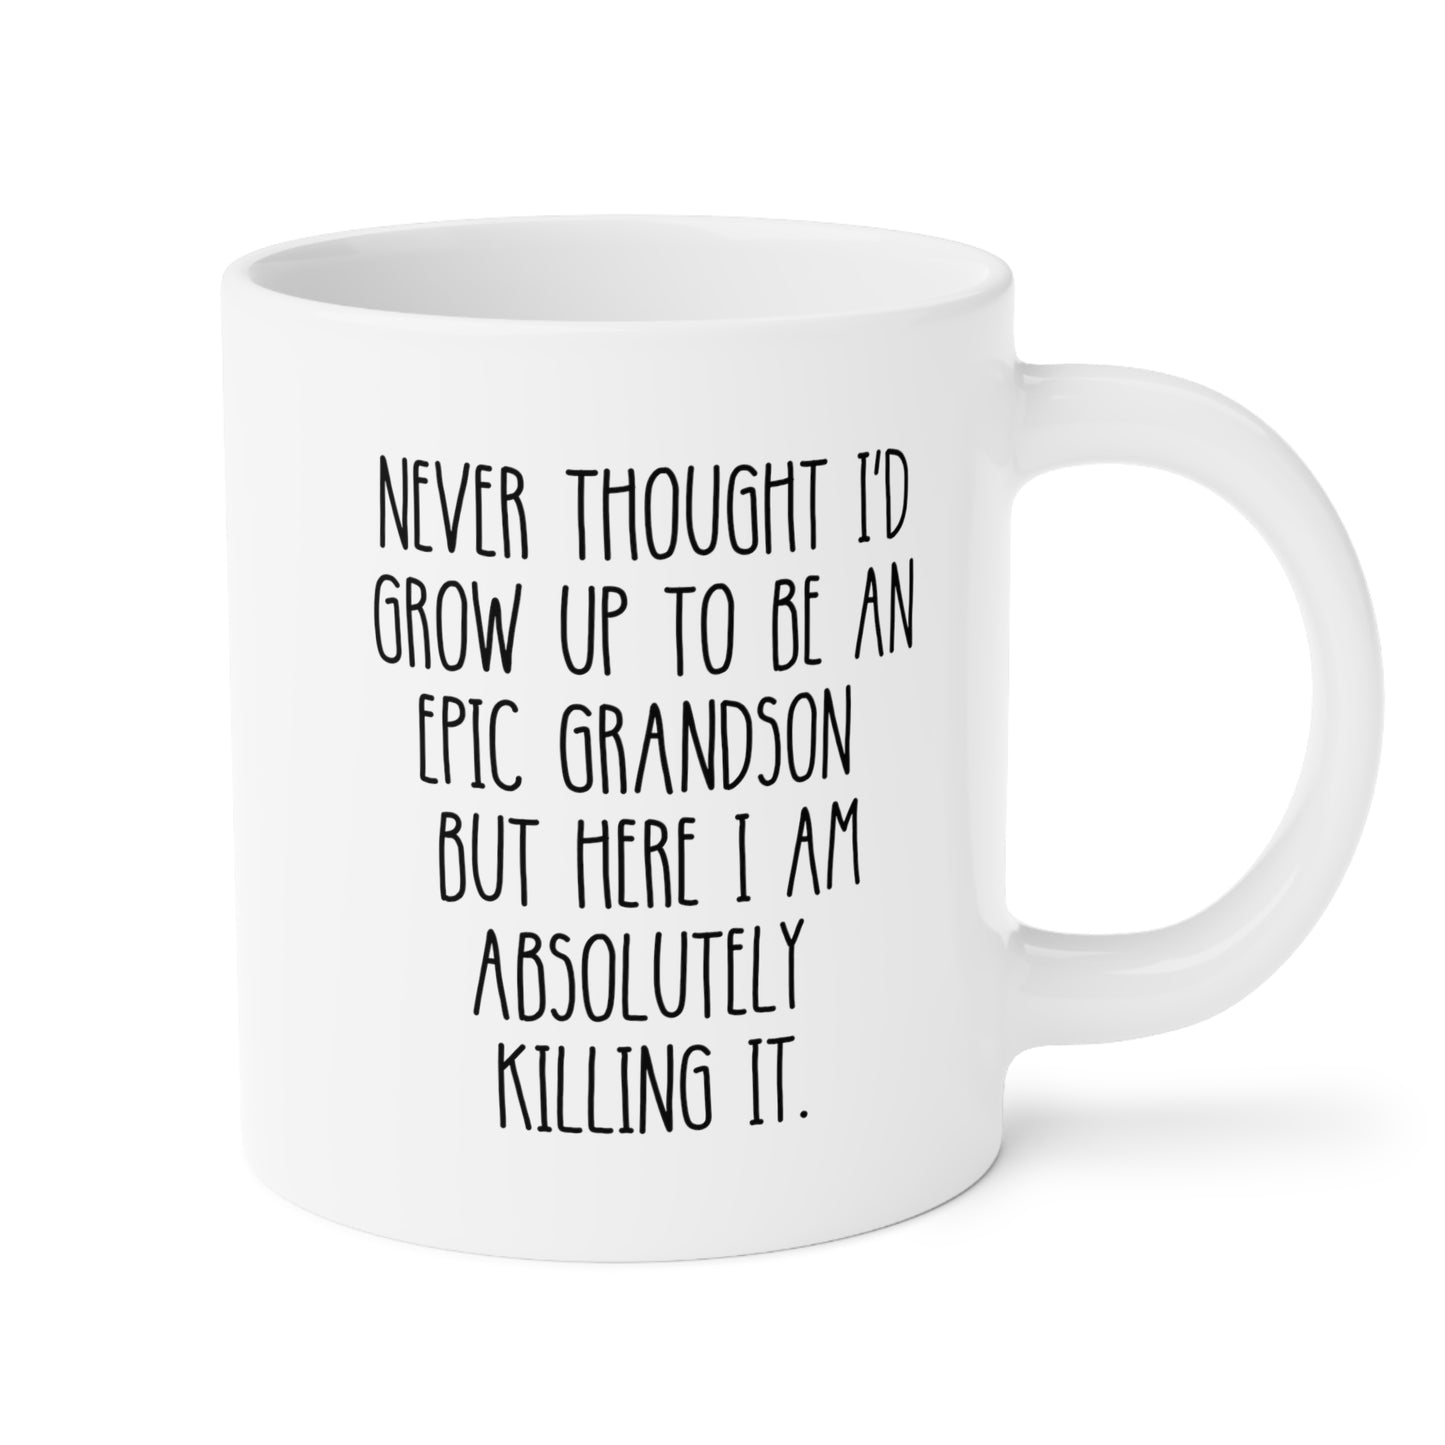 Never Thought I'd Grow Up To Be An Epic Grandson But Here I Am Absolutely Killing It 20oz white funny large coffee mug gift for grandparent waveywares wavey wares wavywares wavy wares